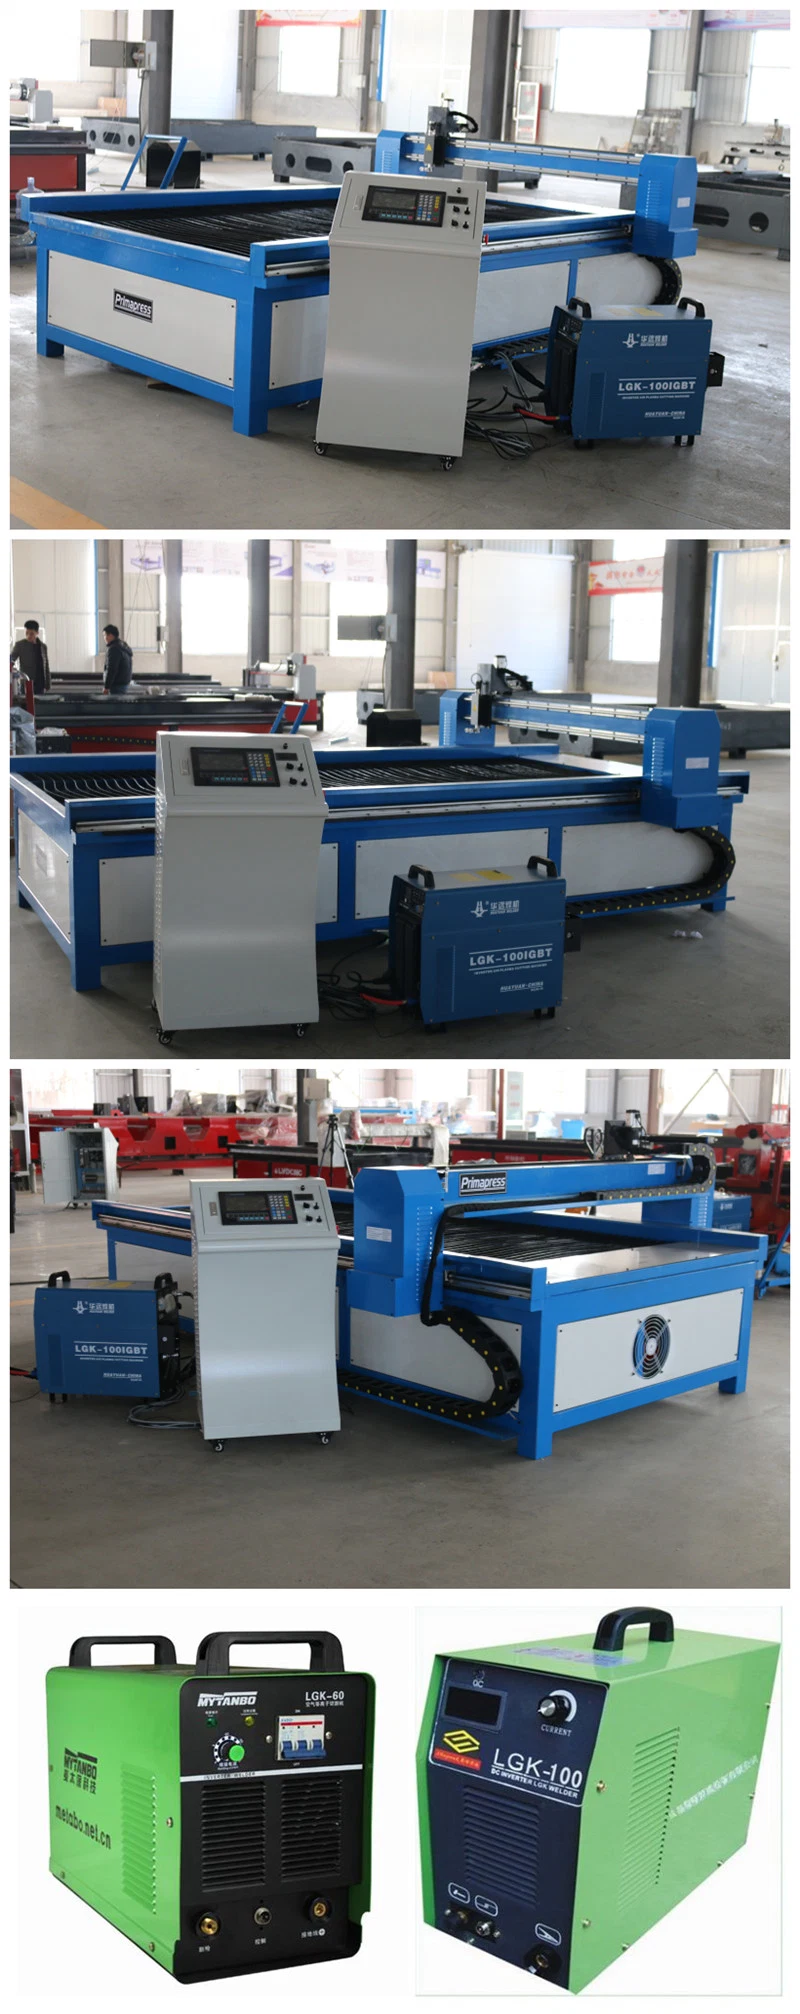 Made in China Metal Cutting Machinery Steel Pipe and Steel Sheet Double Use CNC Machine Plasma Cutter in Stock